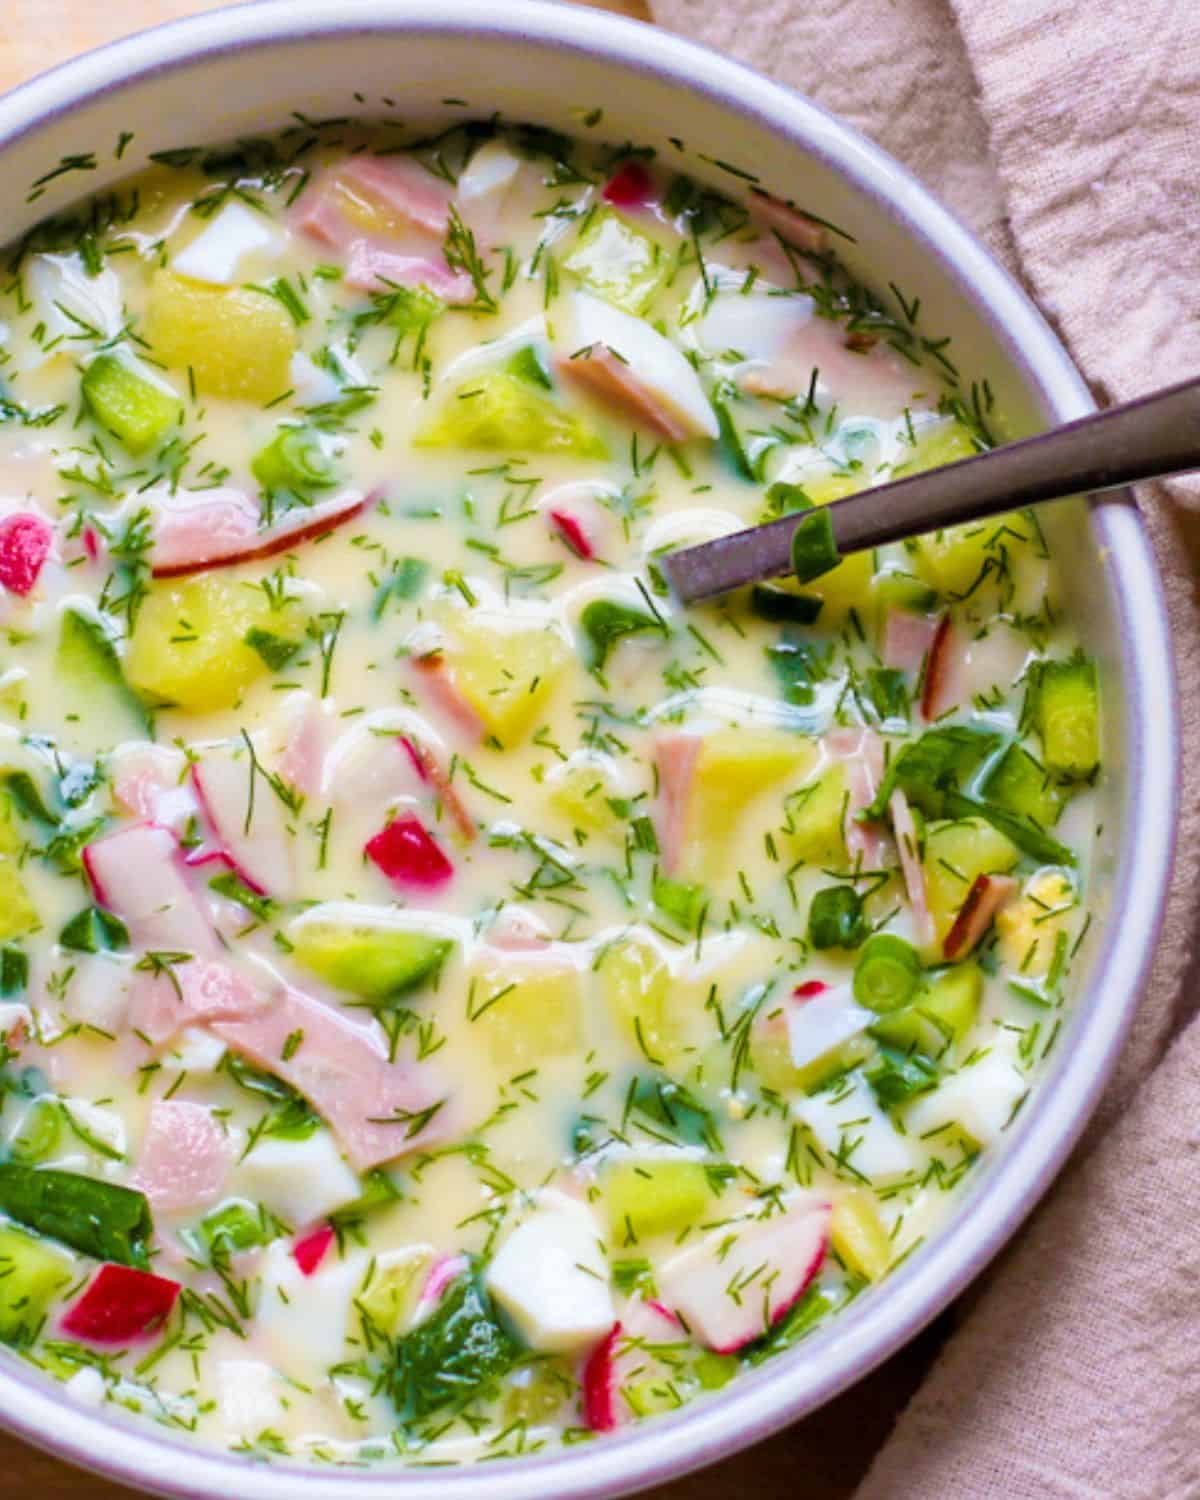 Okroshka cold soup with diced meat, radishes, cucumbers, dill in a deep white bowl.